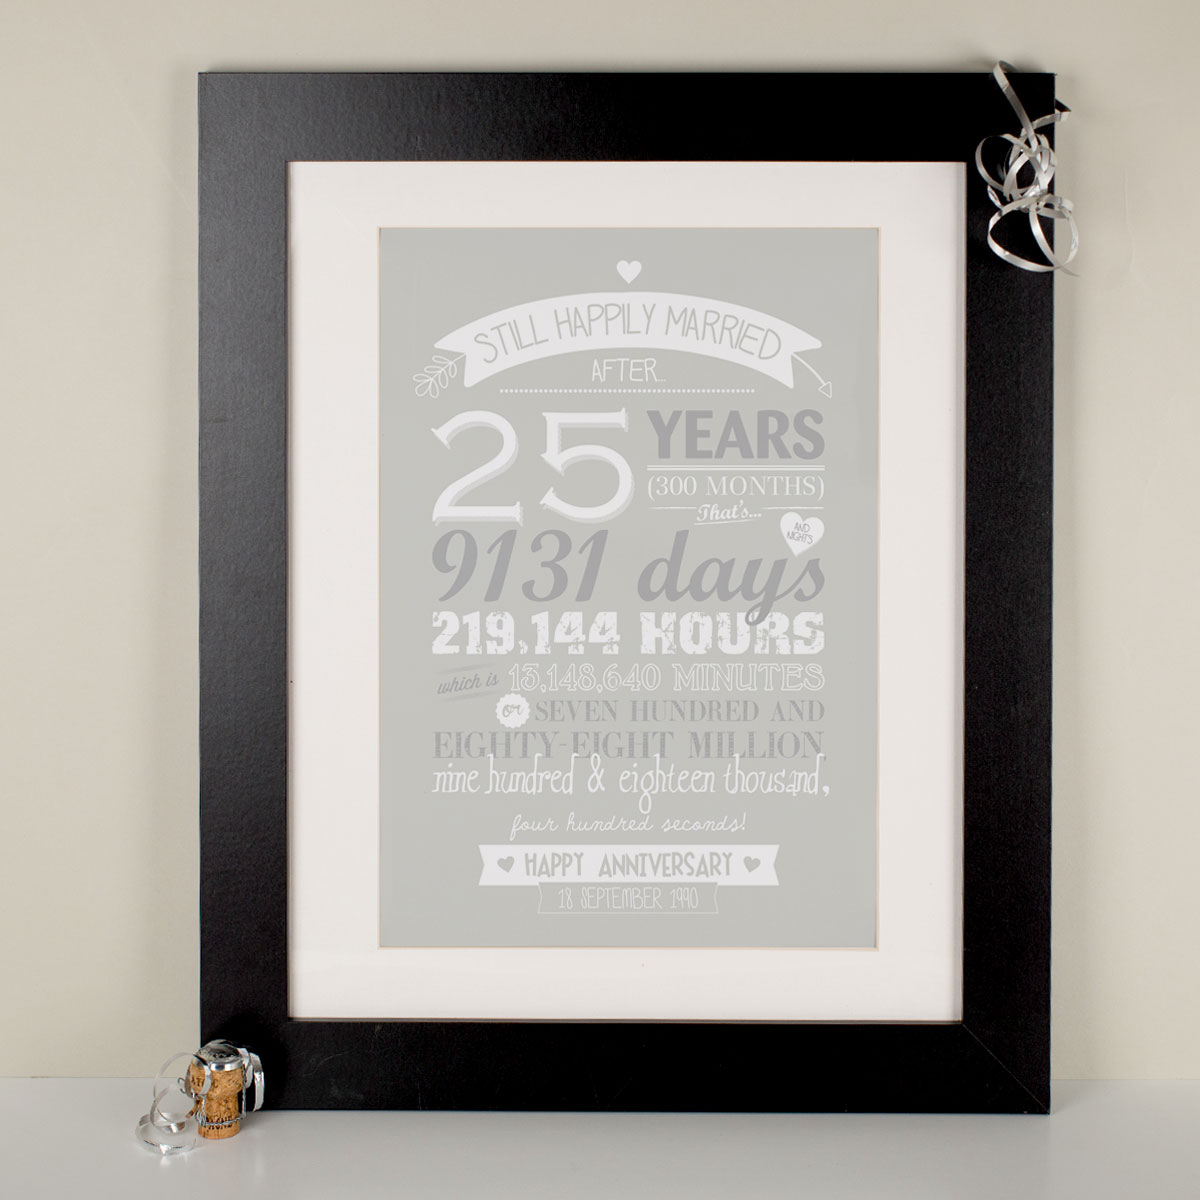 Personalised Framed Print - After 25 Years